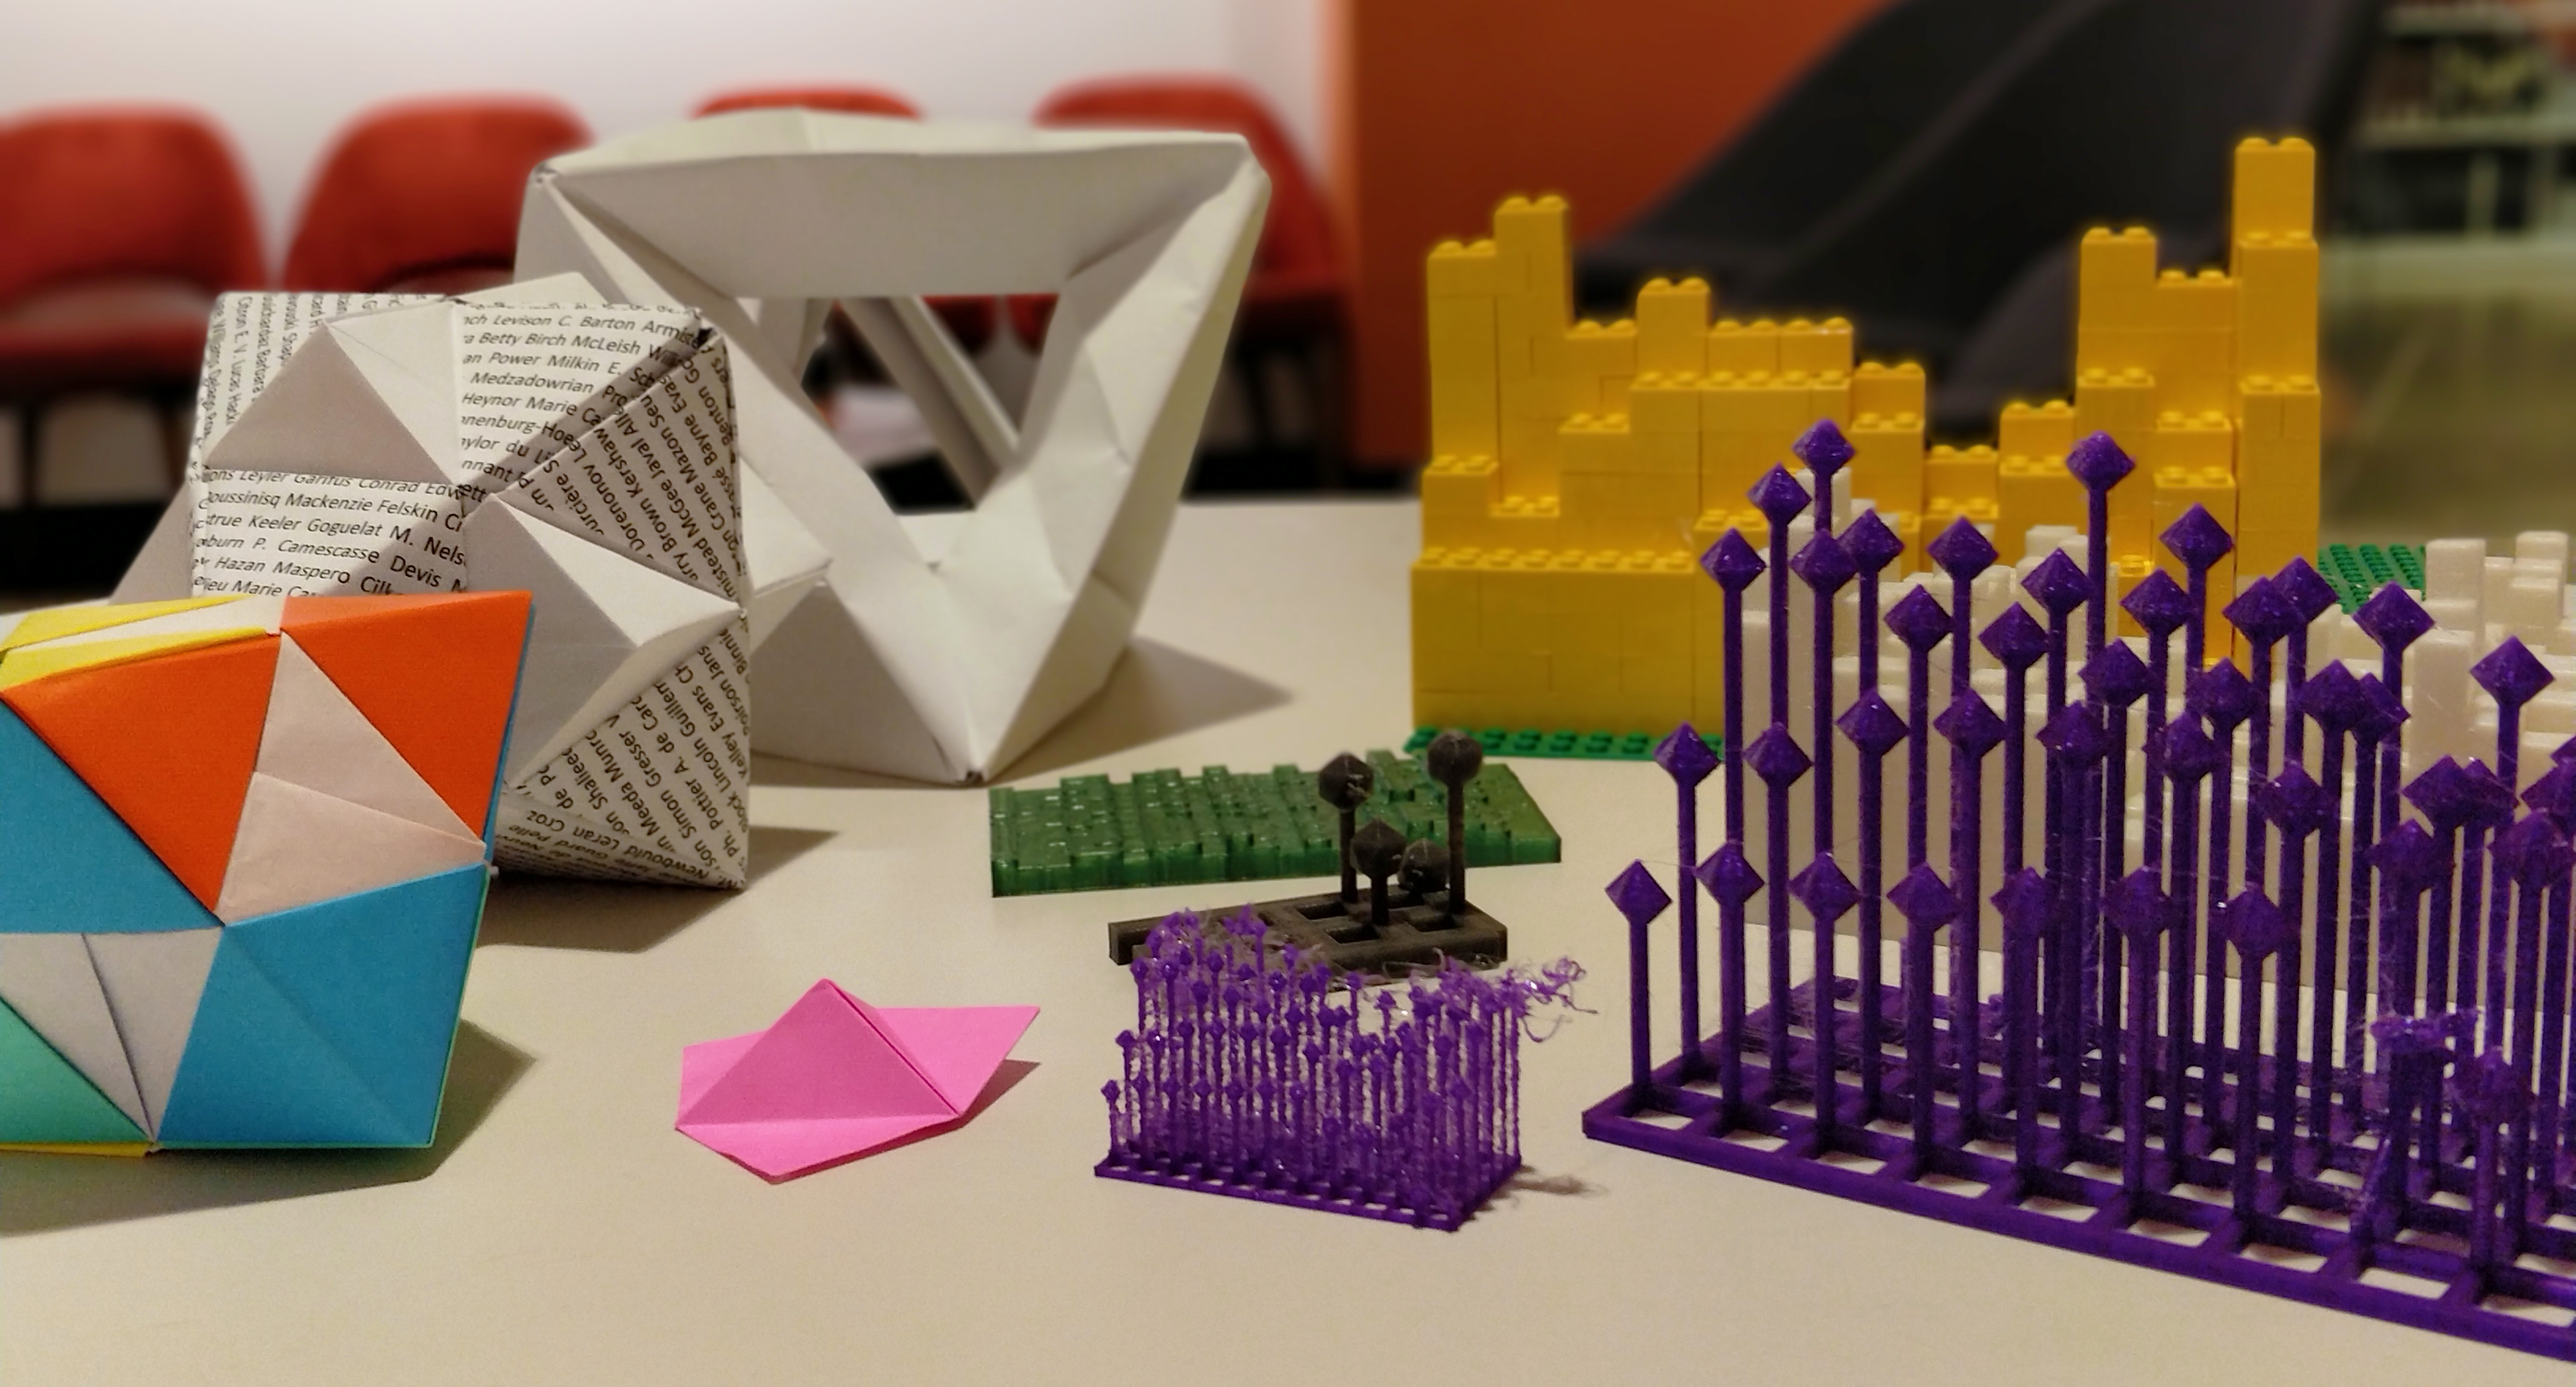 origami, 3d print, and lego prototypes displayed together on a table